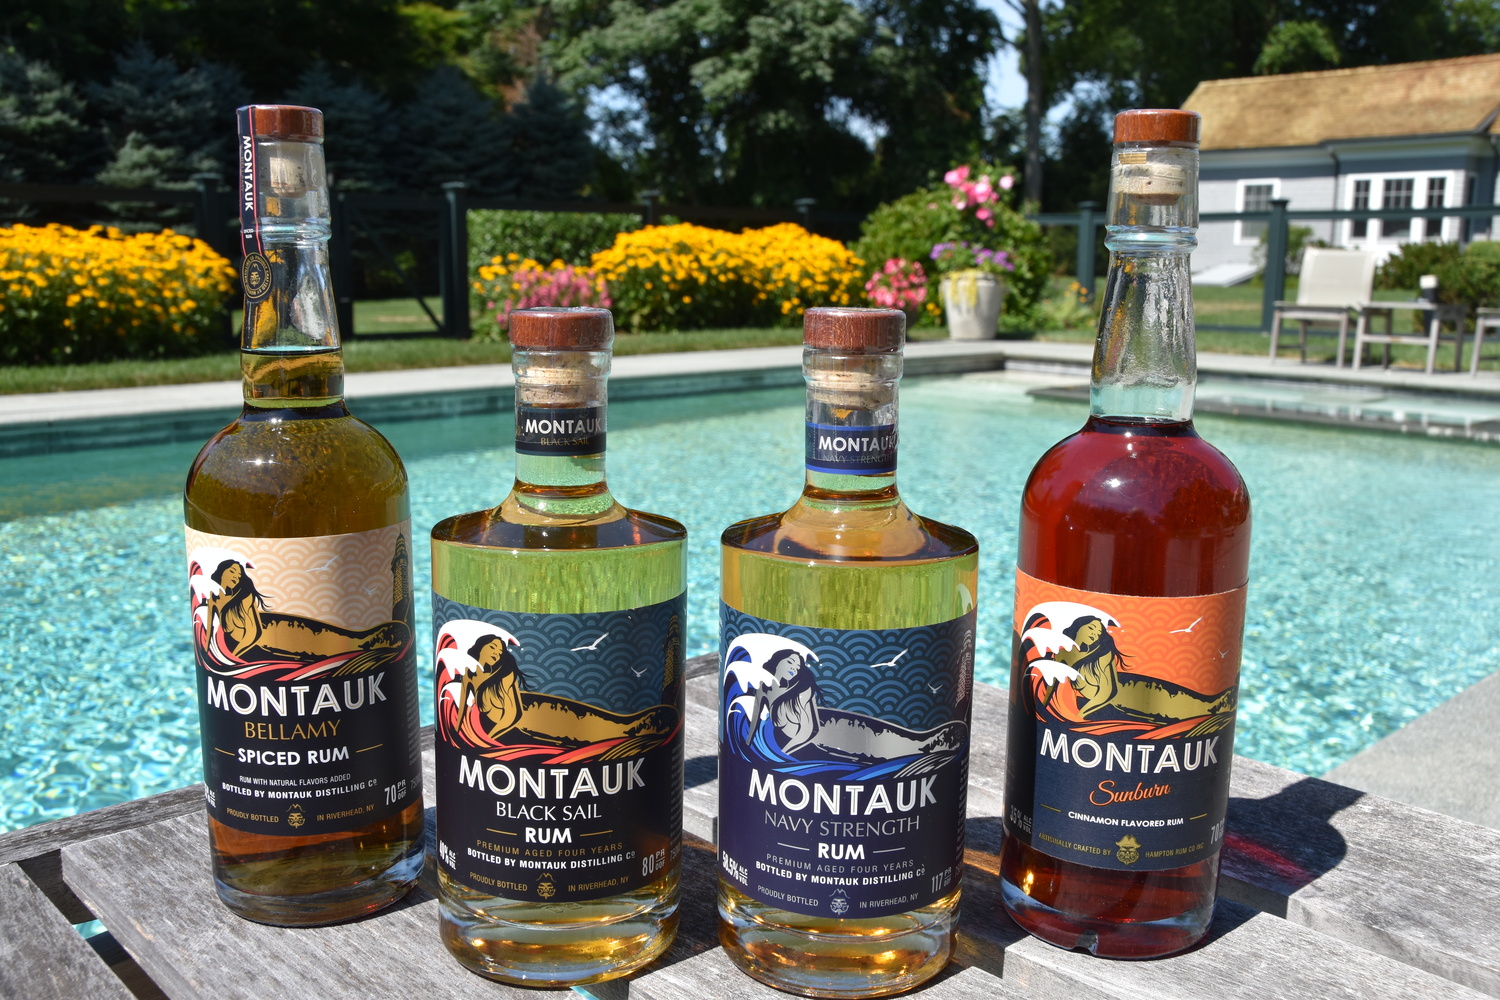 Montauk Distilling Co. is expanding into Rhode Island and New Jersey. COURTESY MONTAUK DISTILLING CO.